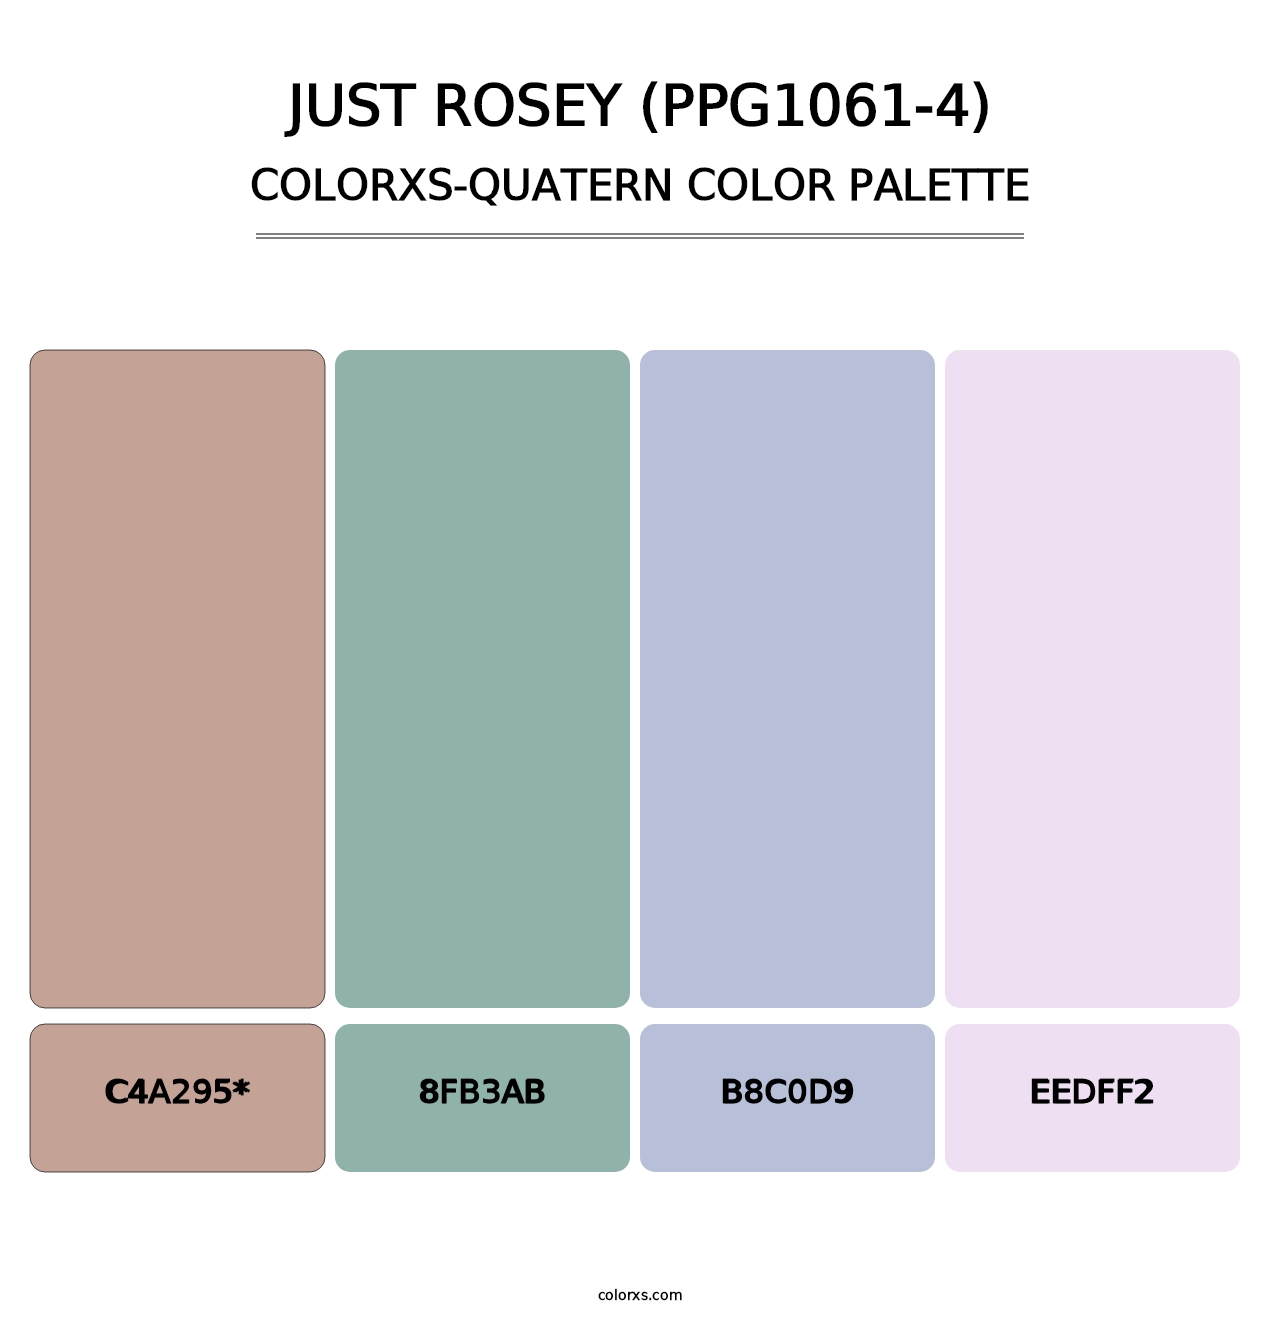 Just Rosey (PPG1061-4) - Colorxs Quatern Palette